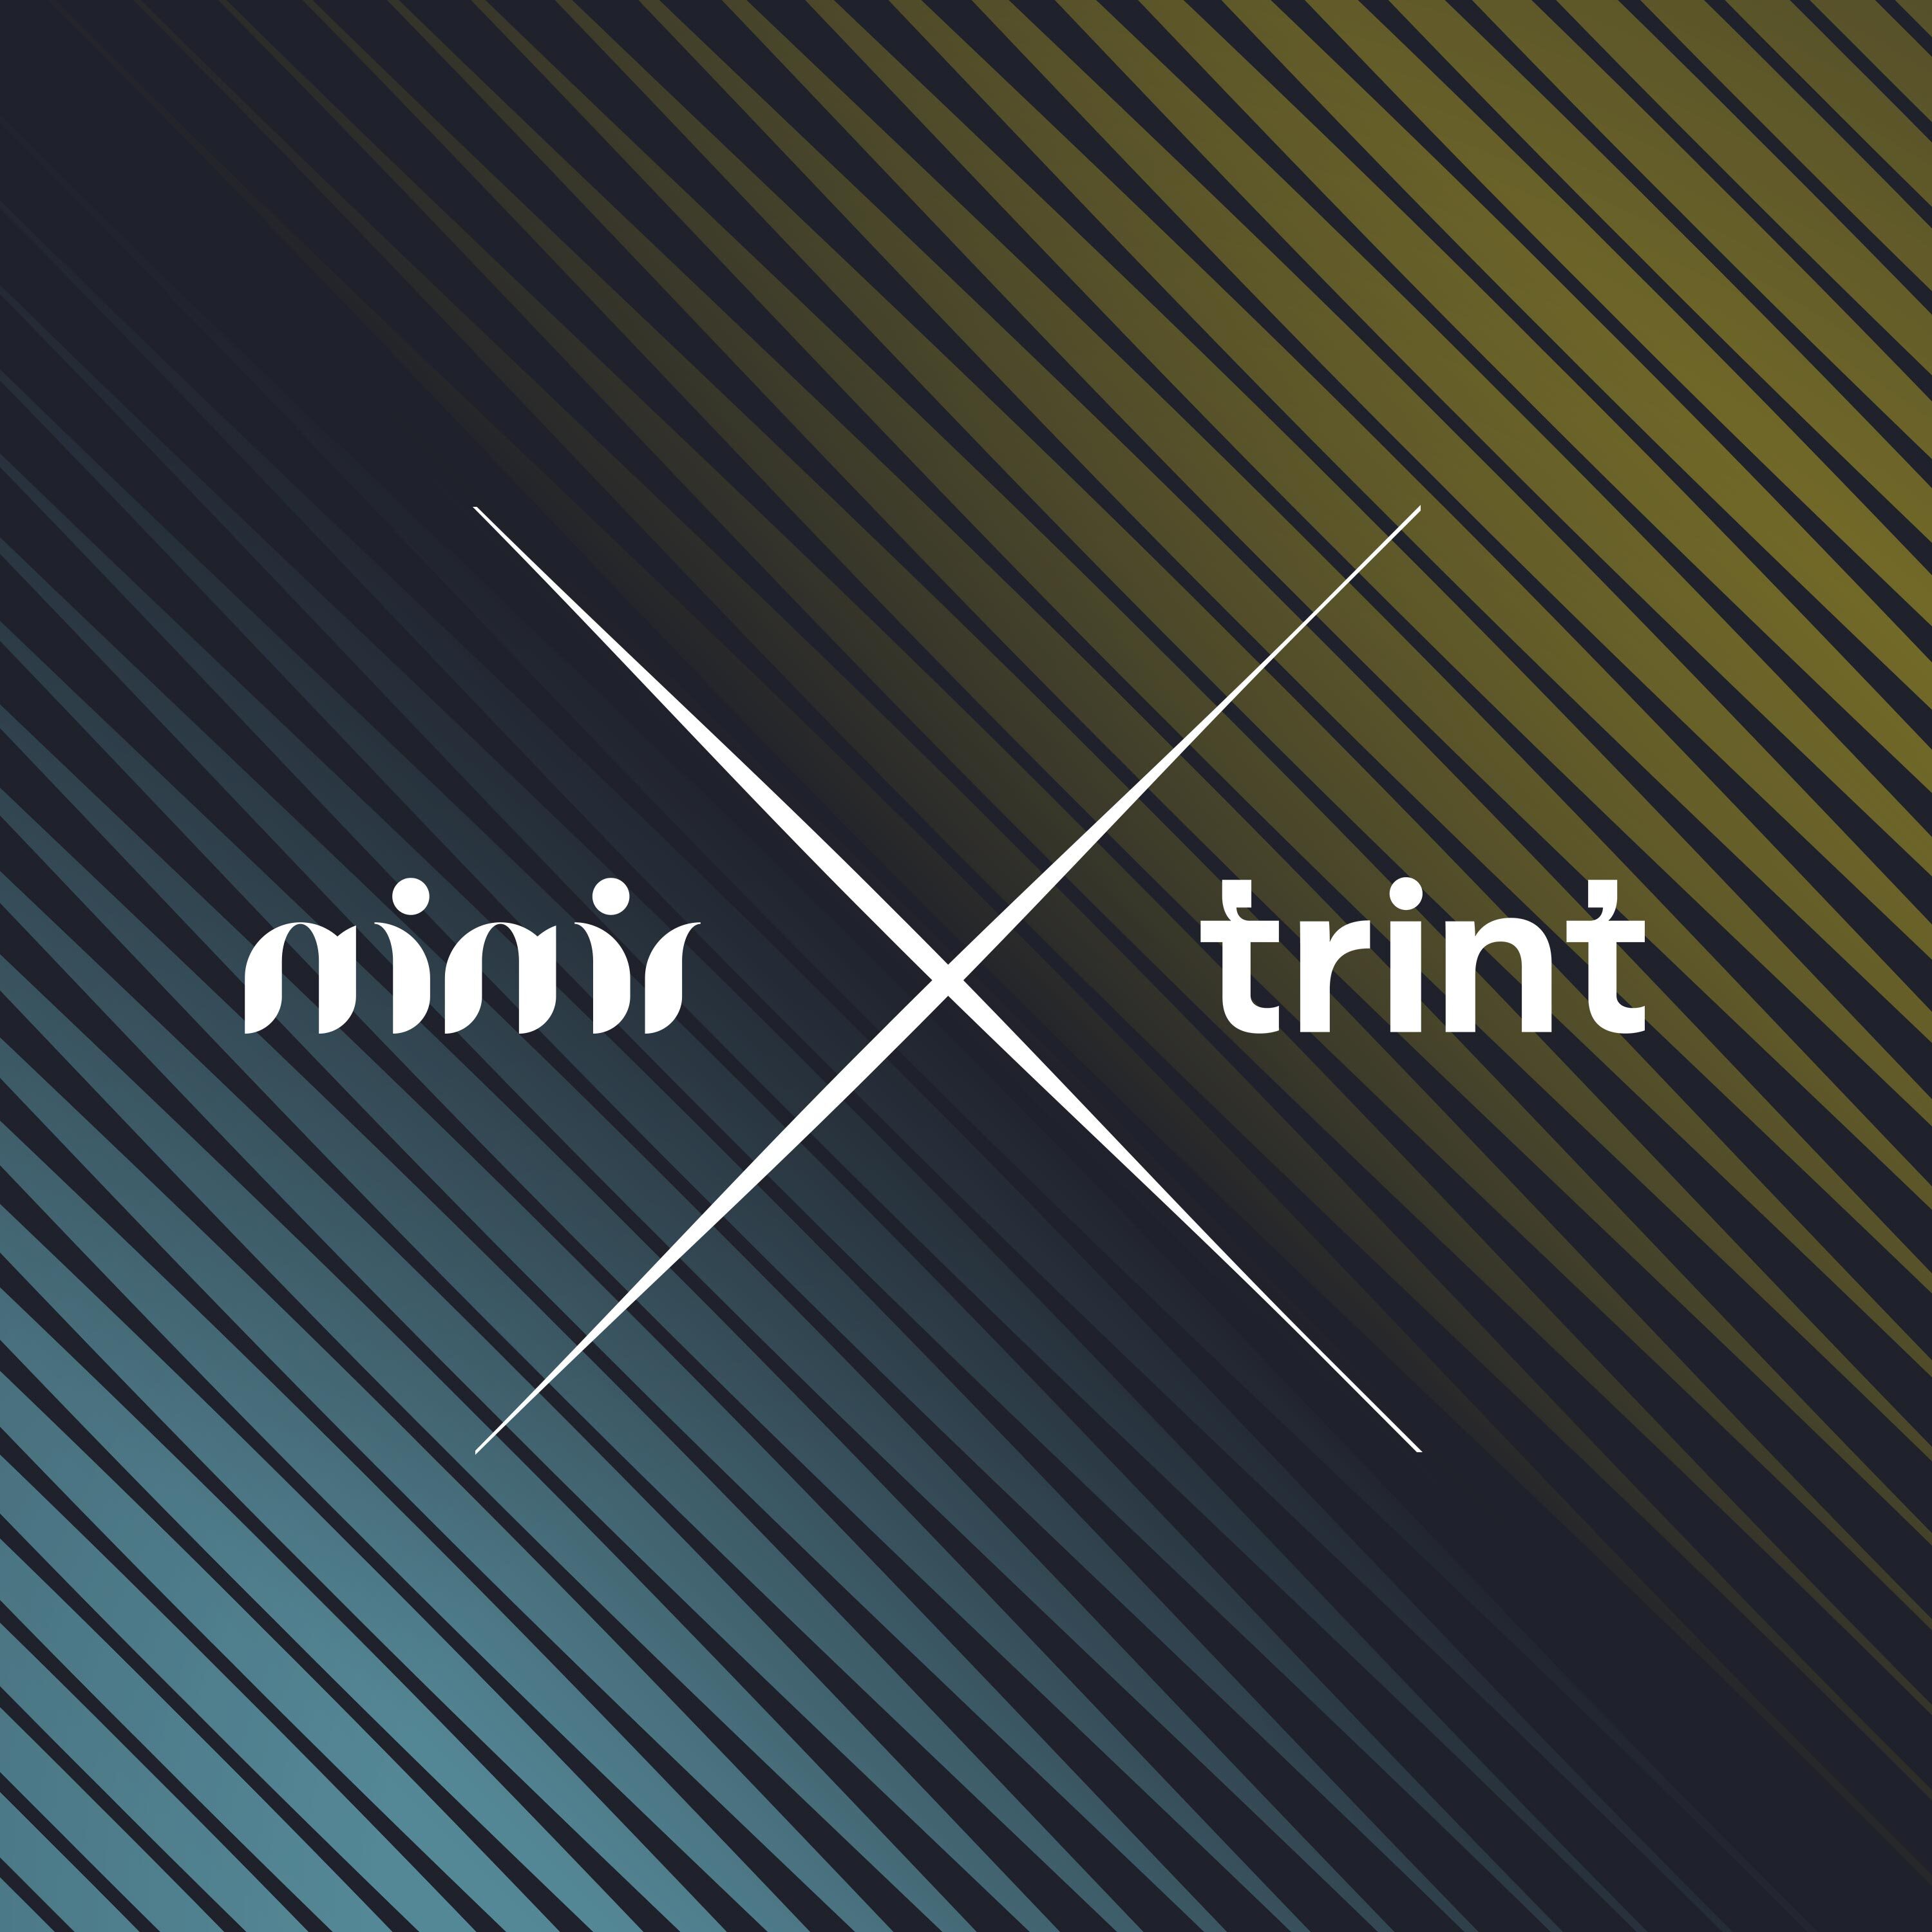 Mimir and Trint logos together